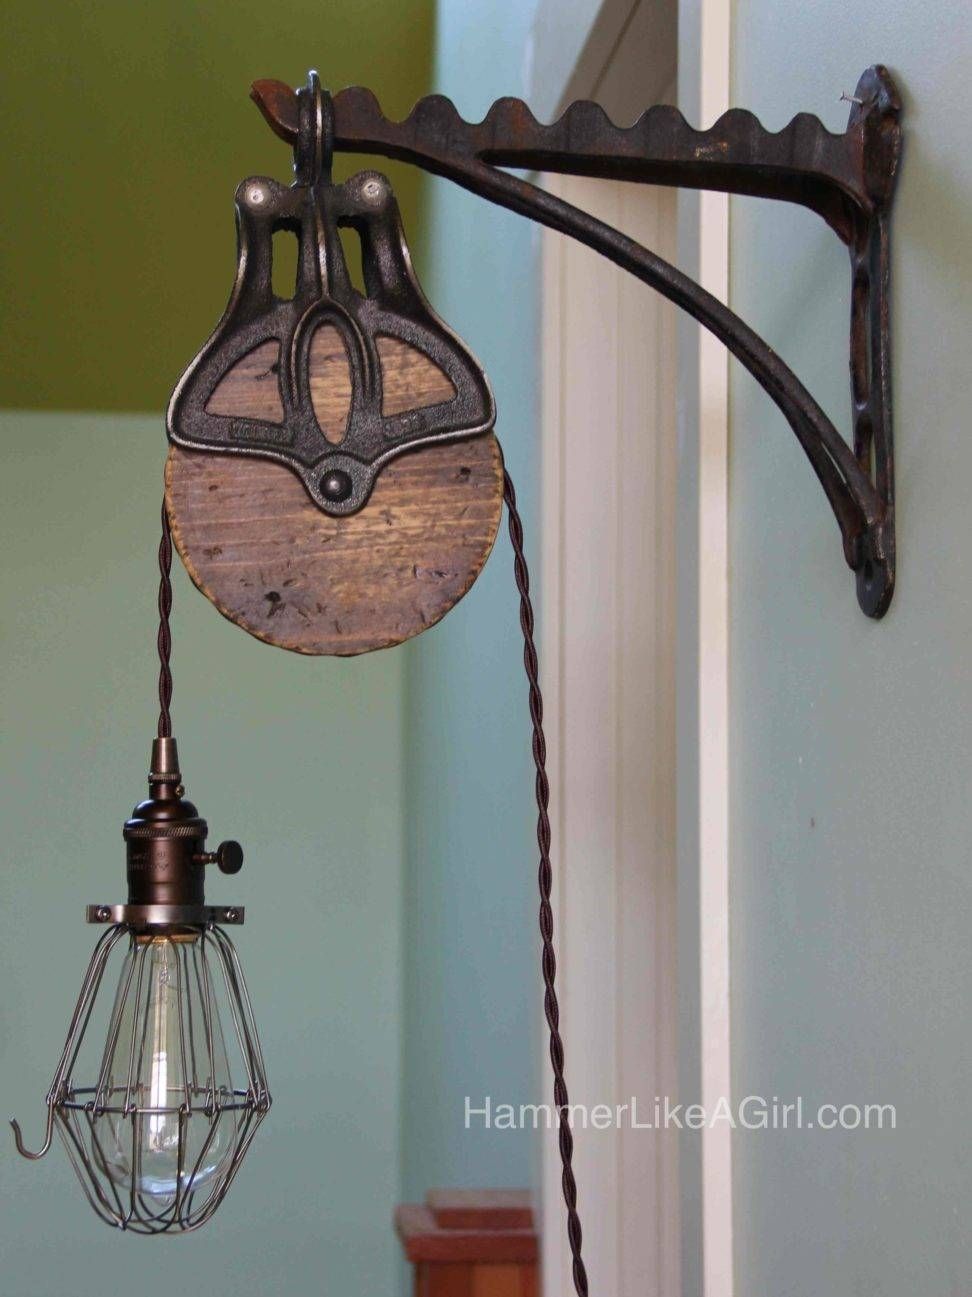 Inspirational Pulley Pendant Light Fixtures 48 For Your Pendant Regarding Pulley Pendant Light Fixtures (View 11 of 15)